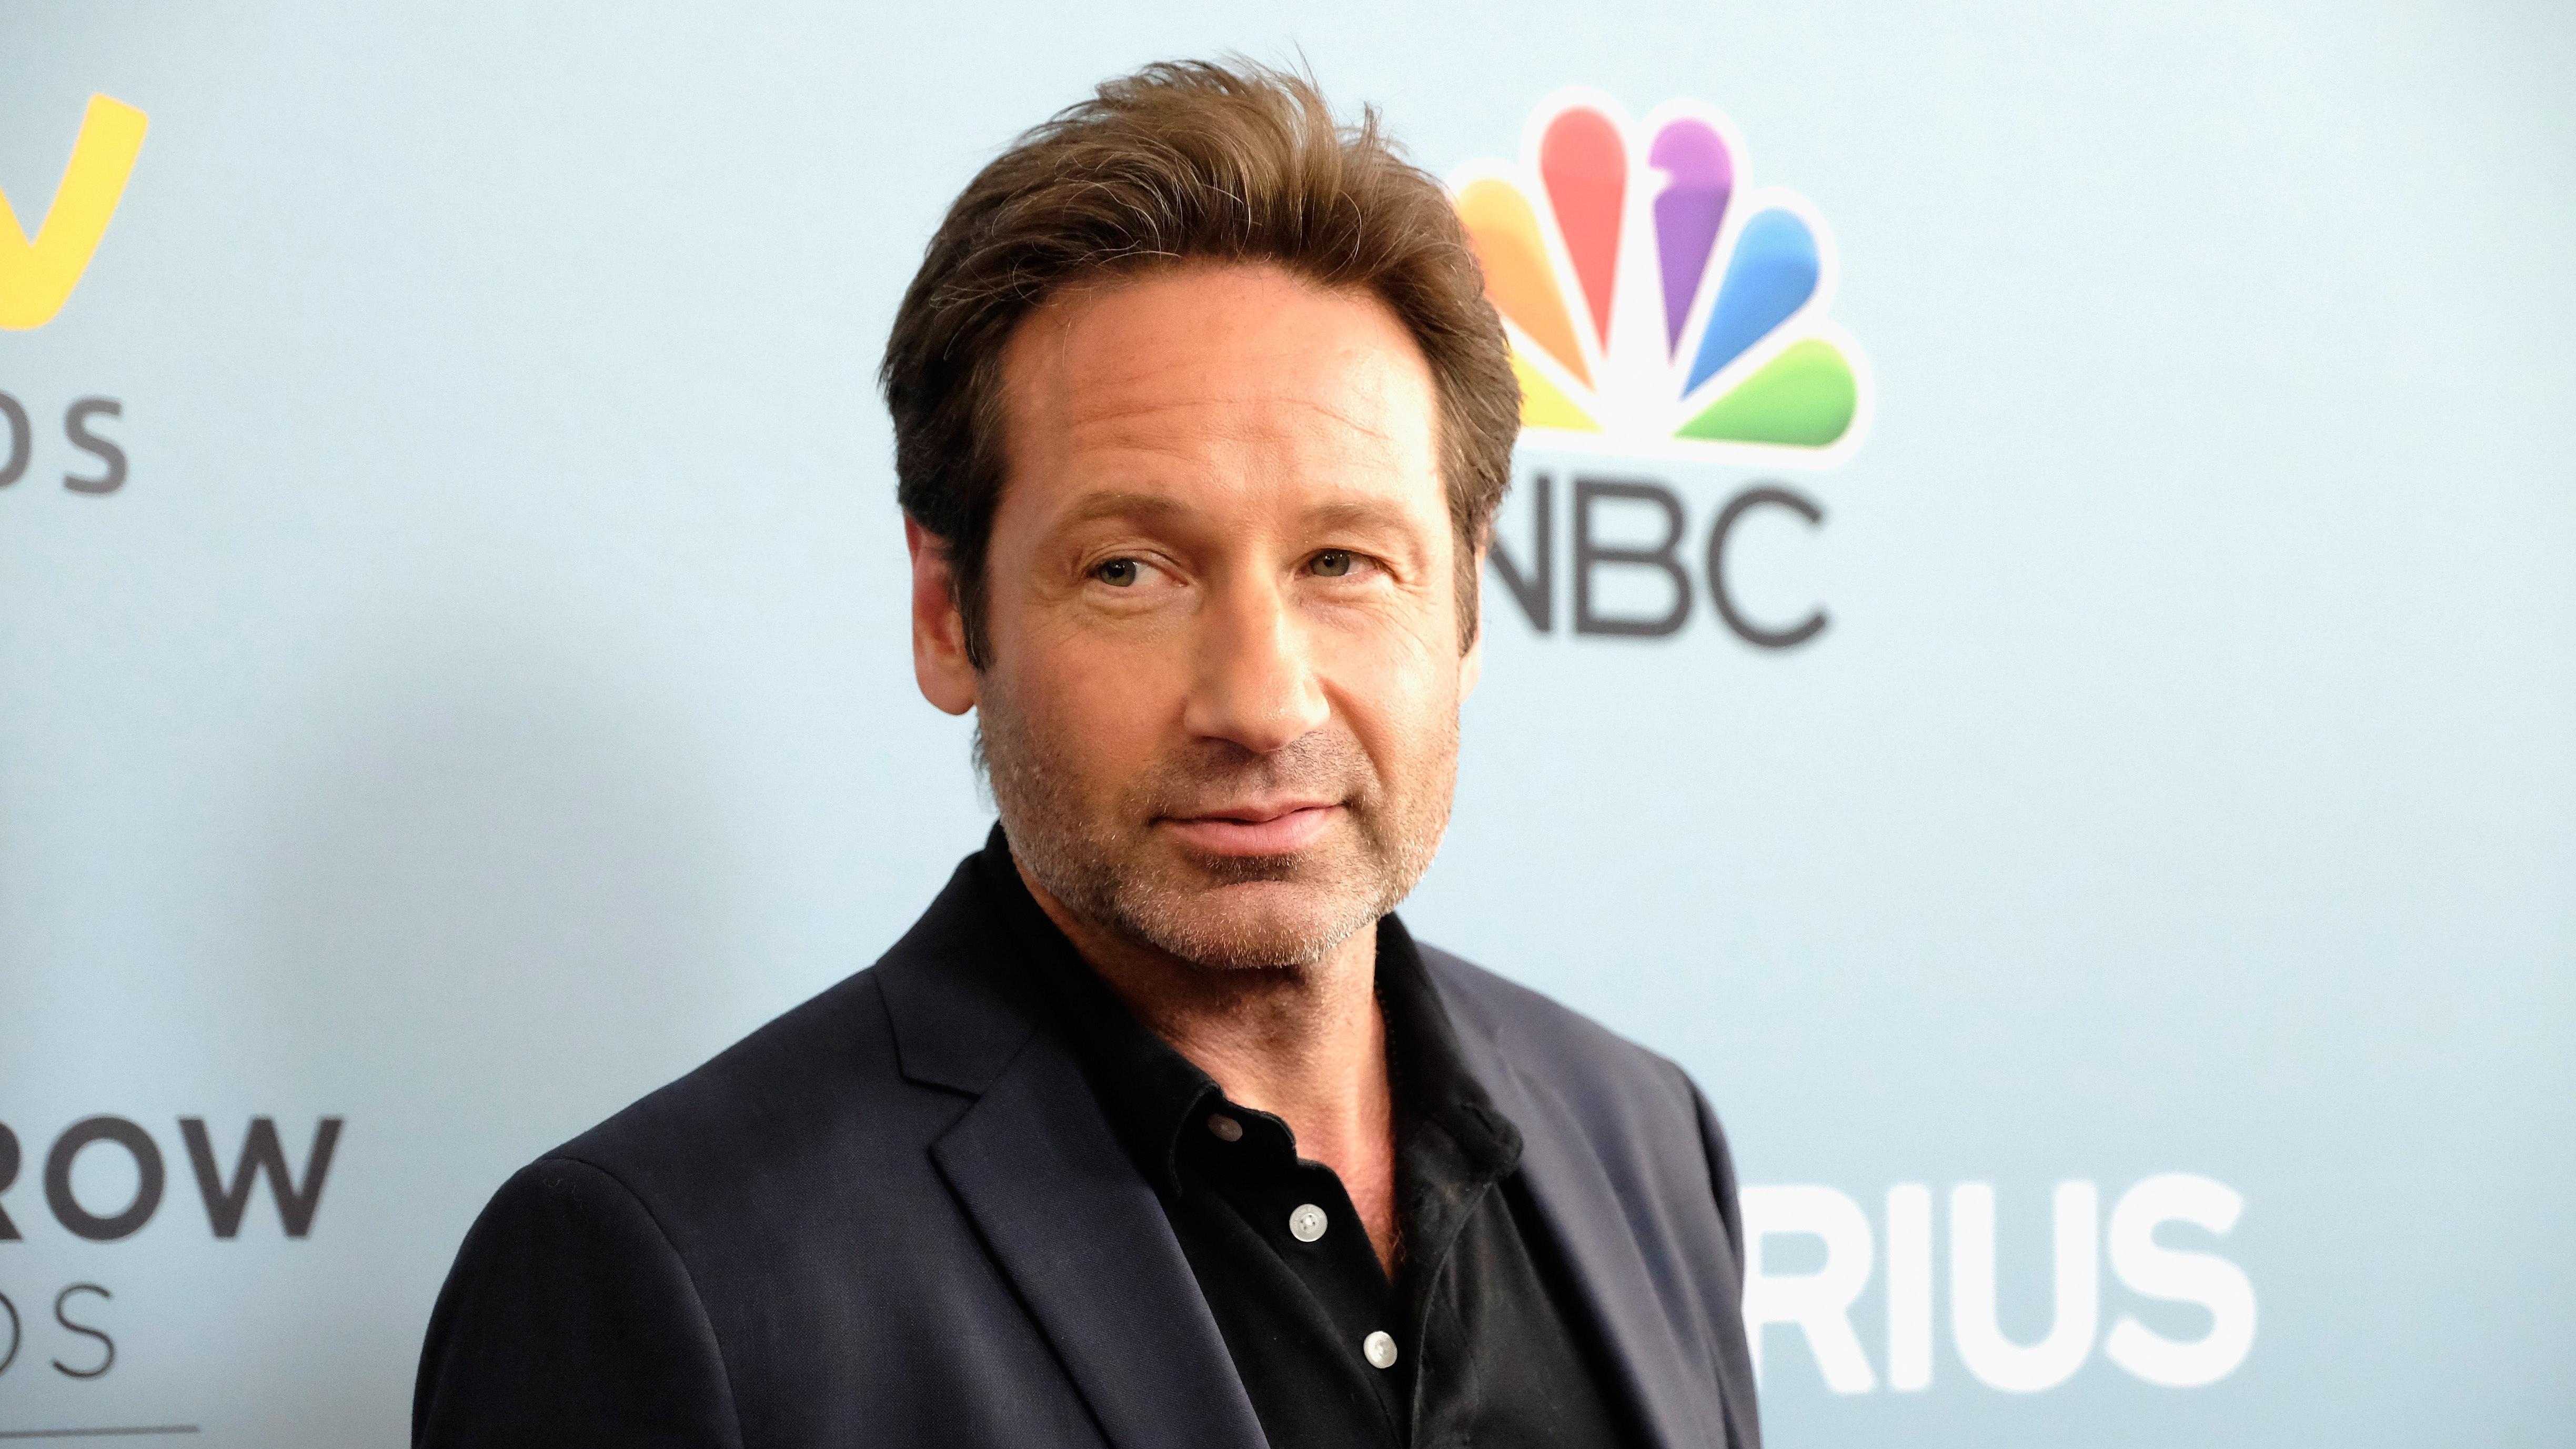 David Duchovny auditioned for every lead role on Full House before landing The X-Files